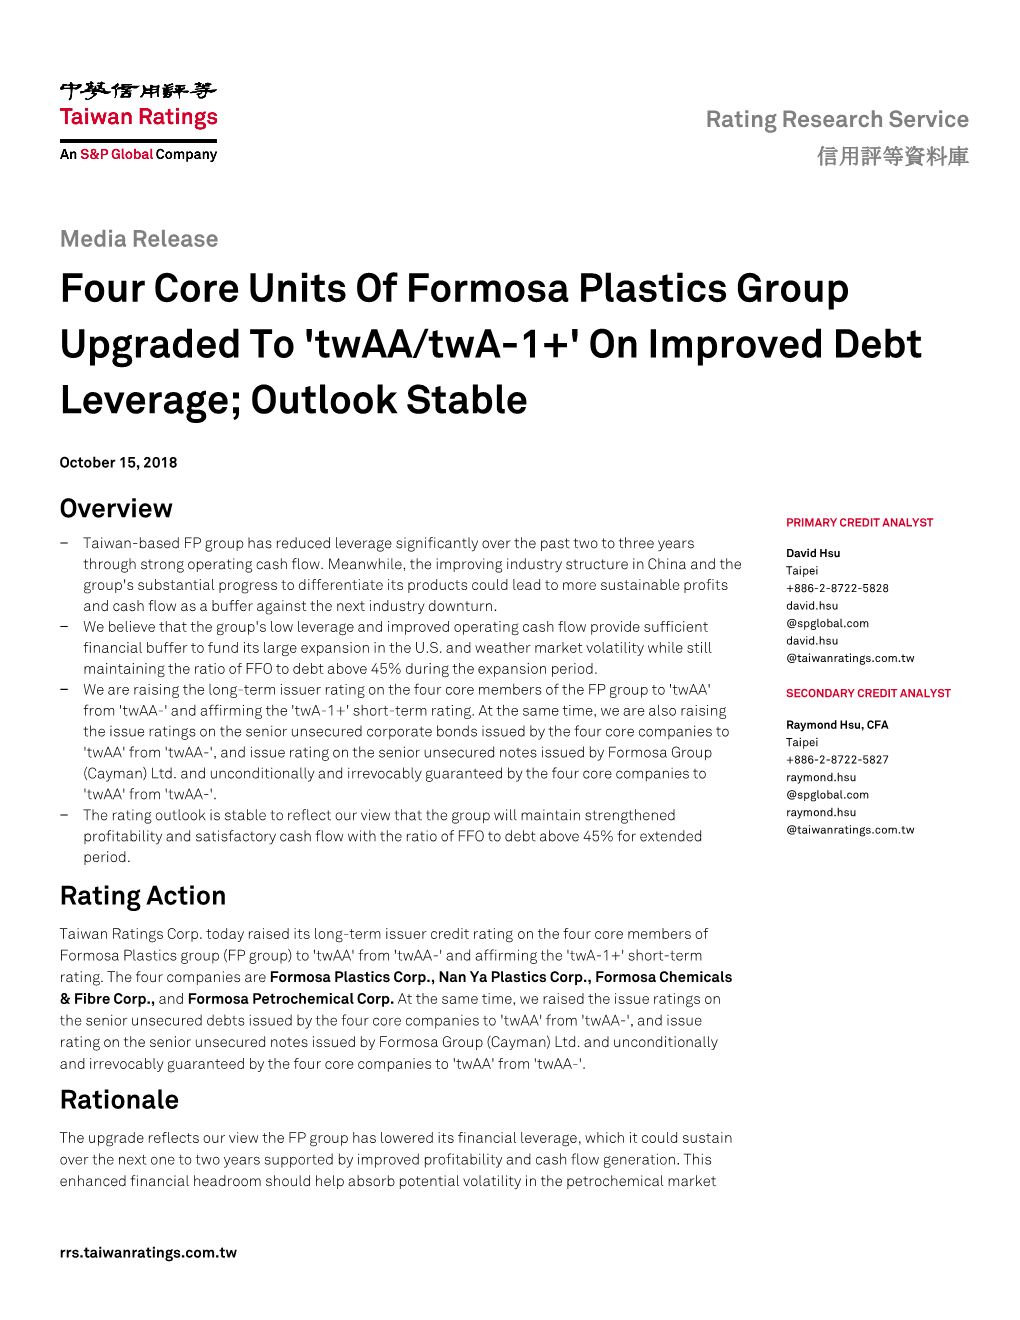 Four Core Units of Formosa Plastics Group Upgraded to 'Twaa/Twa-1+' on Improved Debt Leverage; Outlook Stable